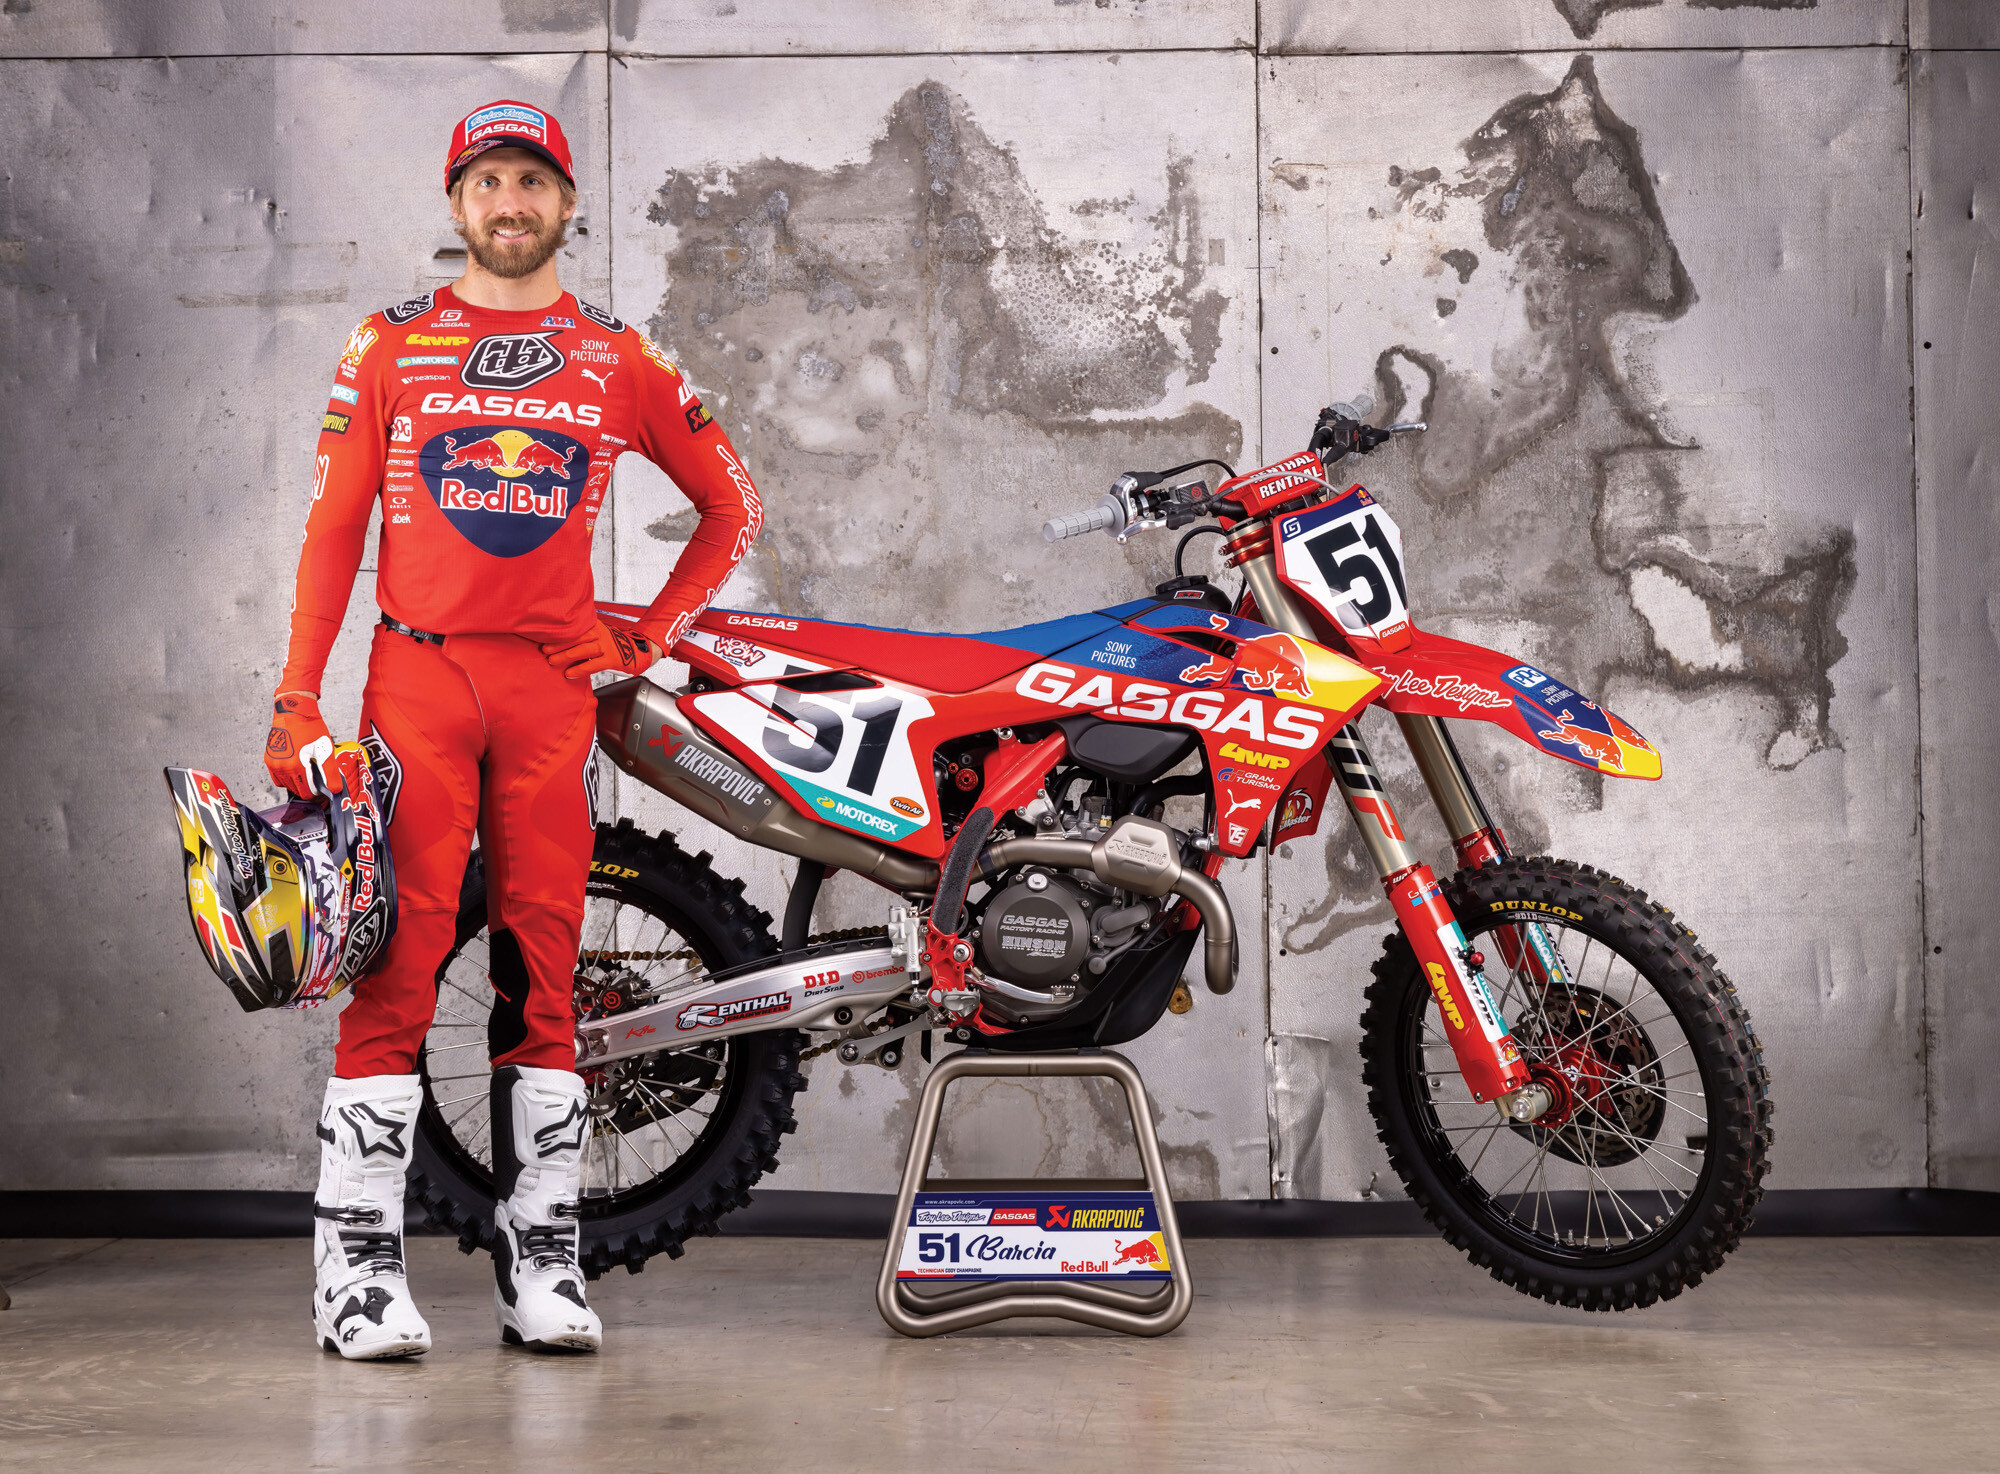 ALL-NEW GASGAS TROY LEE DESIGNS COLLECTION IS BIGGER AND BOLDER THAN EVER!